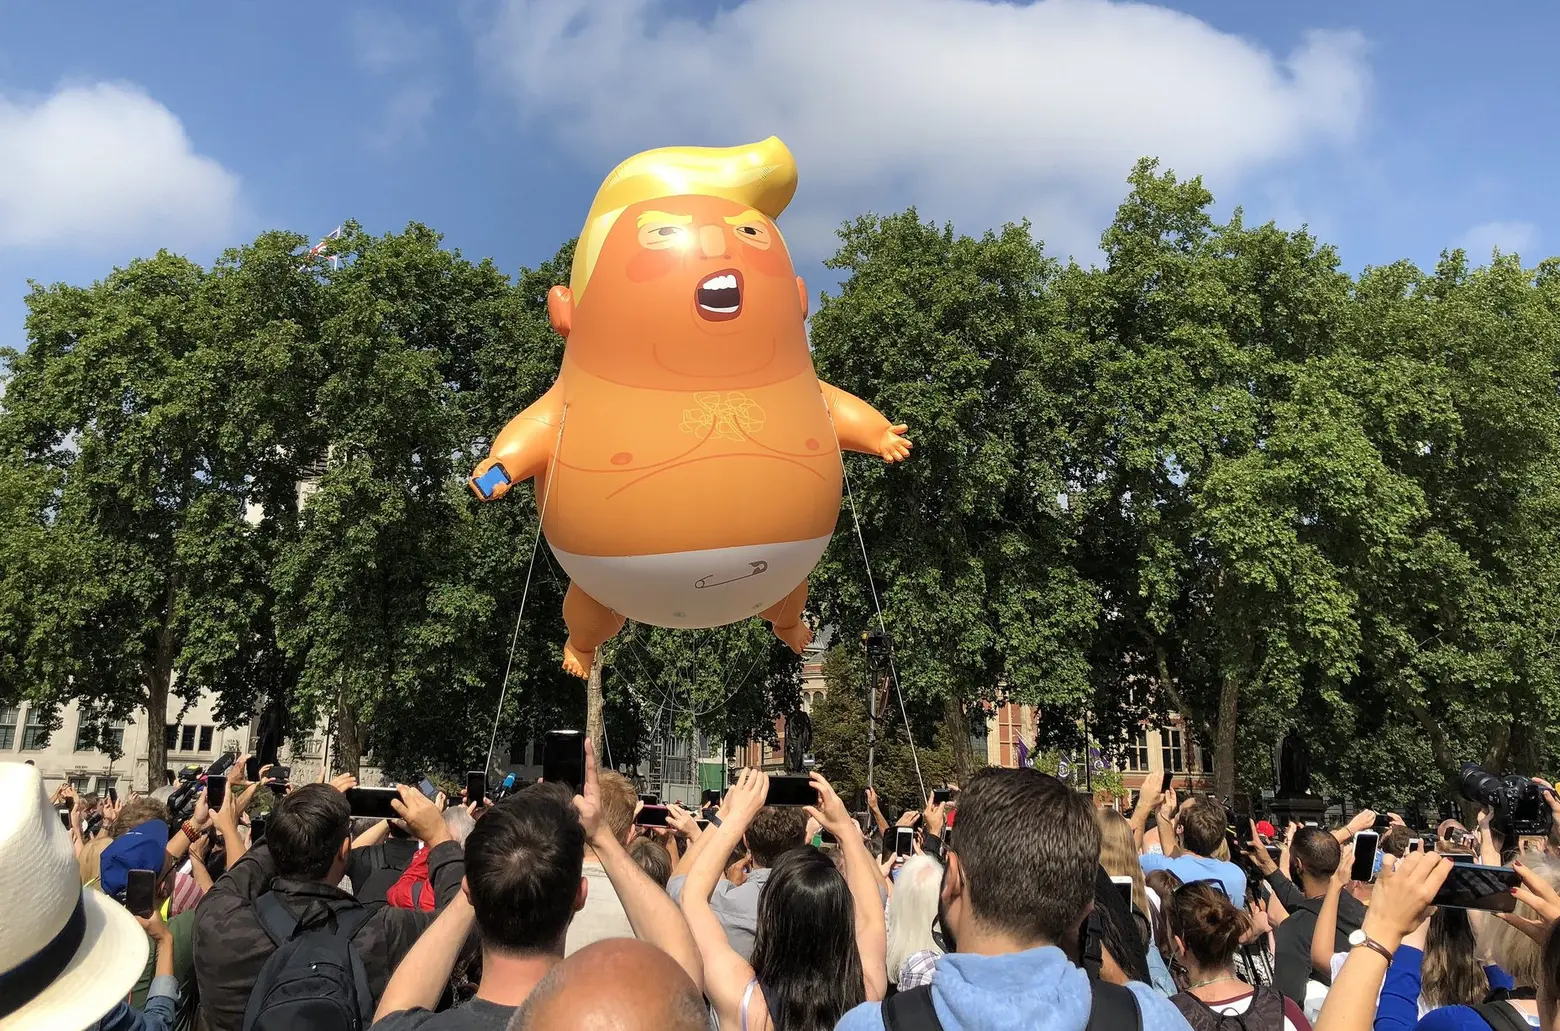 ‘Baby Trump’ blimp is coming to NJ